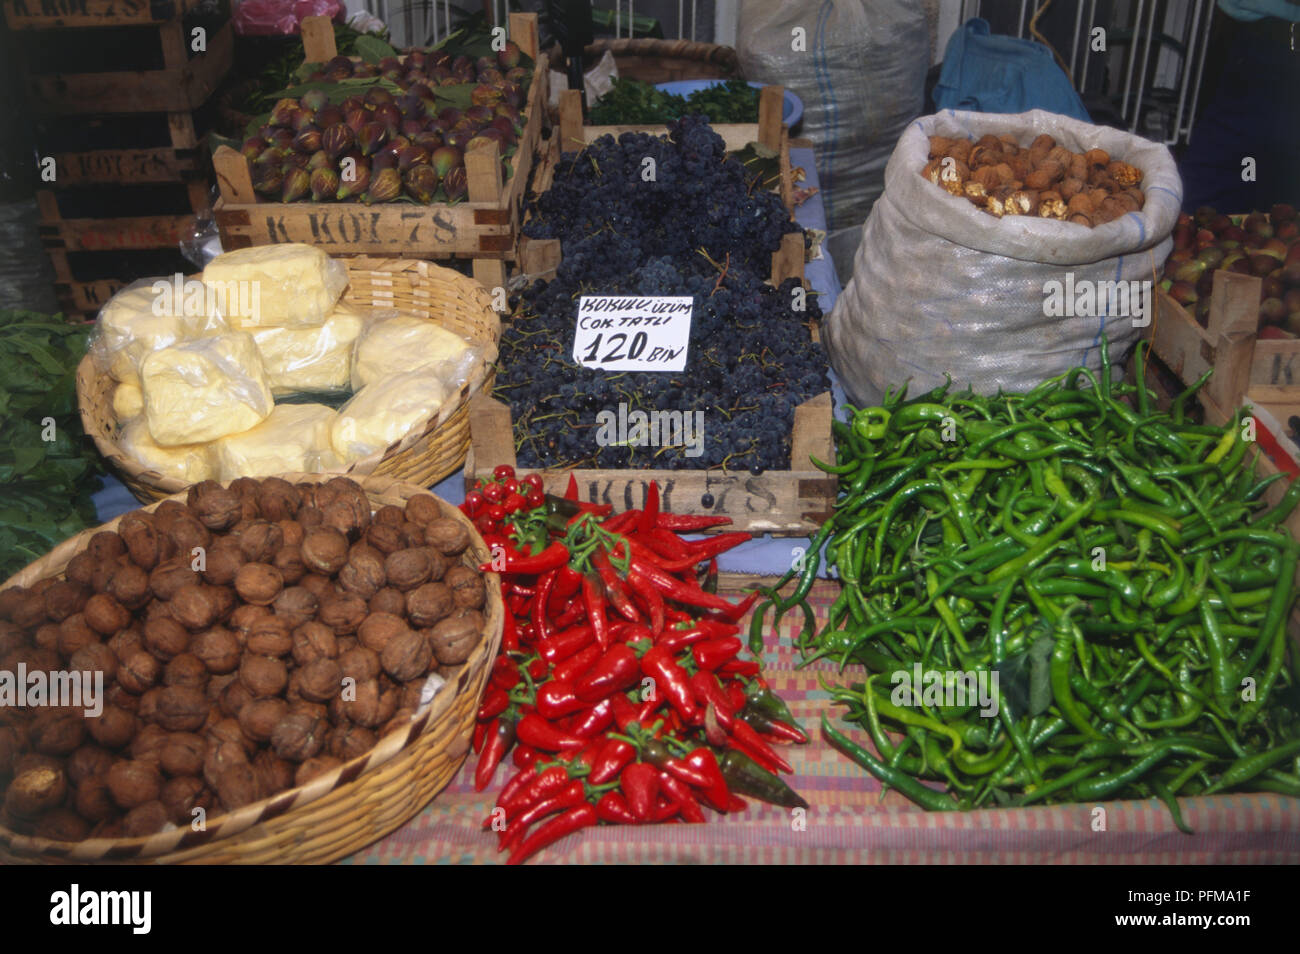 Asia, Turkey, Istanbul, Besktas Square Market, colourful array of fresh fruit and vegetables including red and green chillies, black grapes and walnuts, for sale. Stock Photo